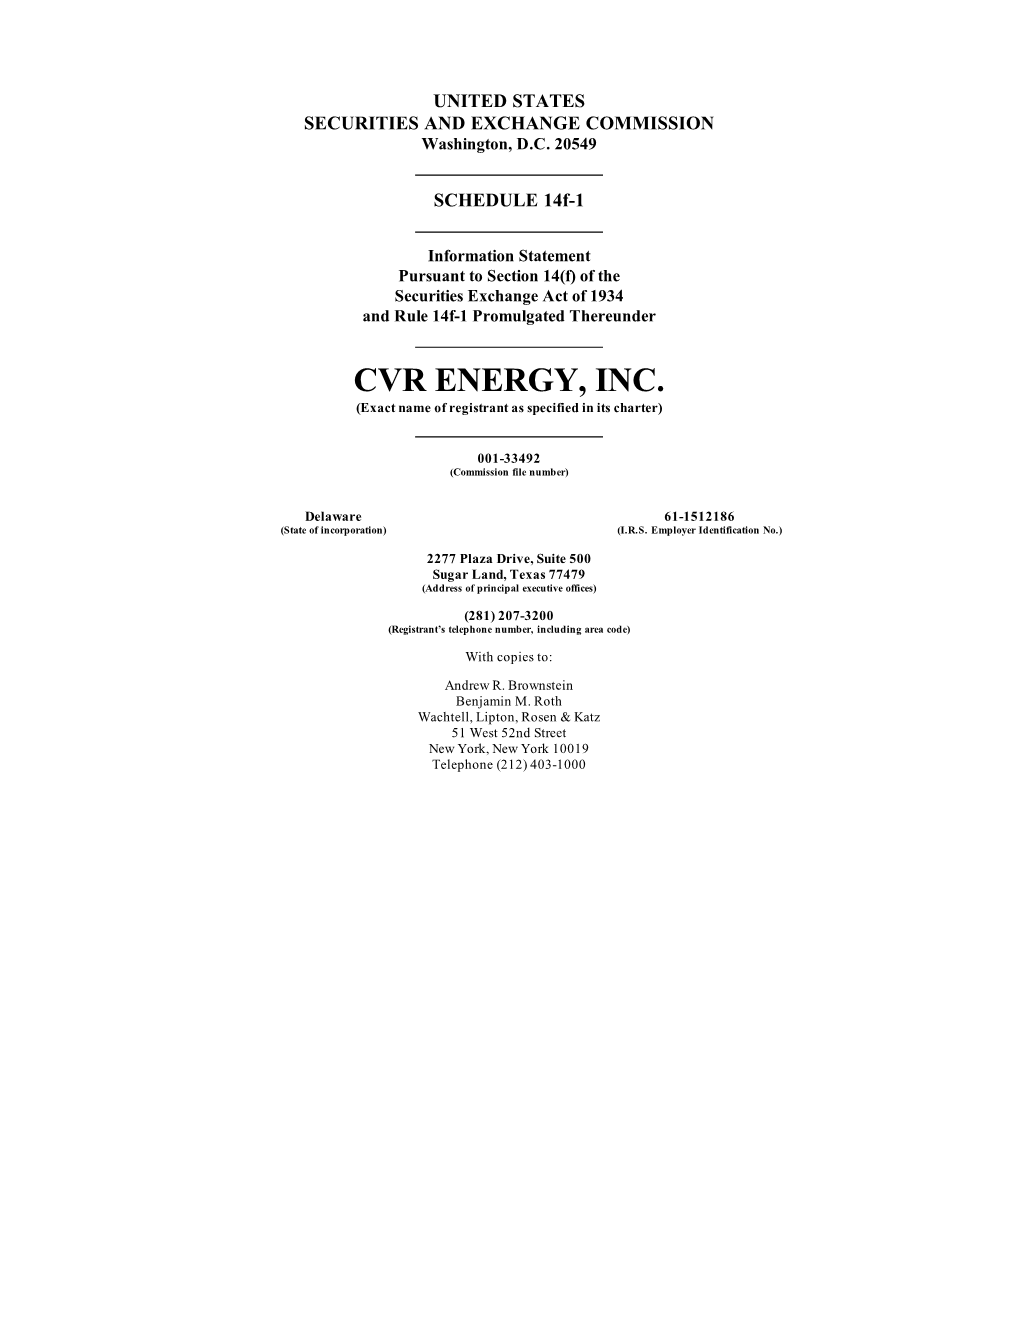 CVR ENERGY, INC. (Exact Name of Registrant As Specified in Its Charter)